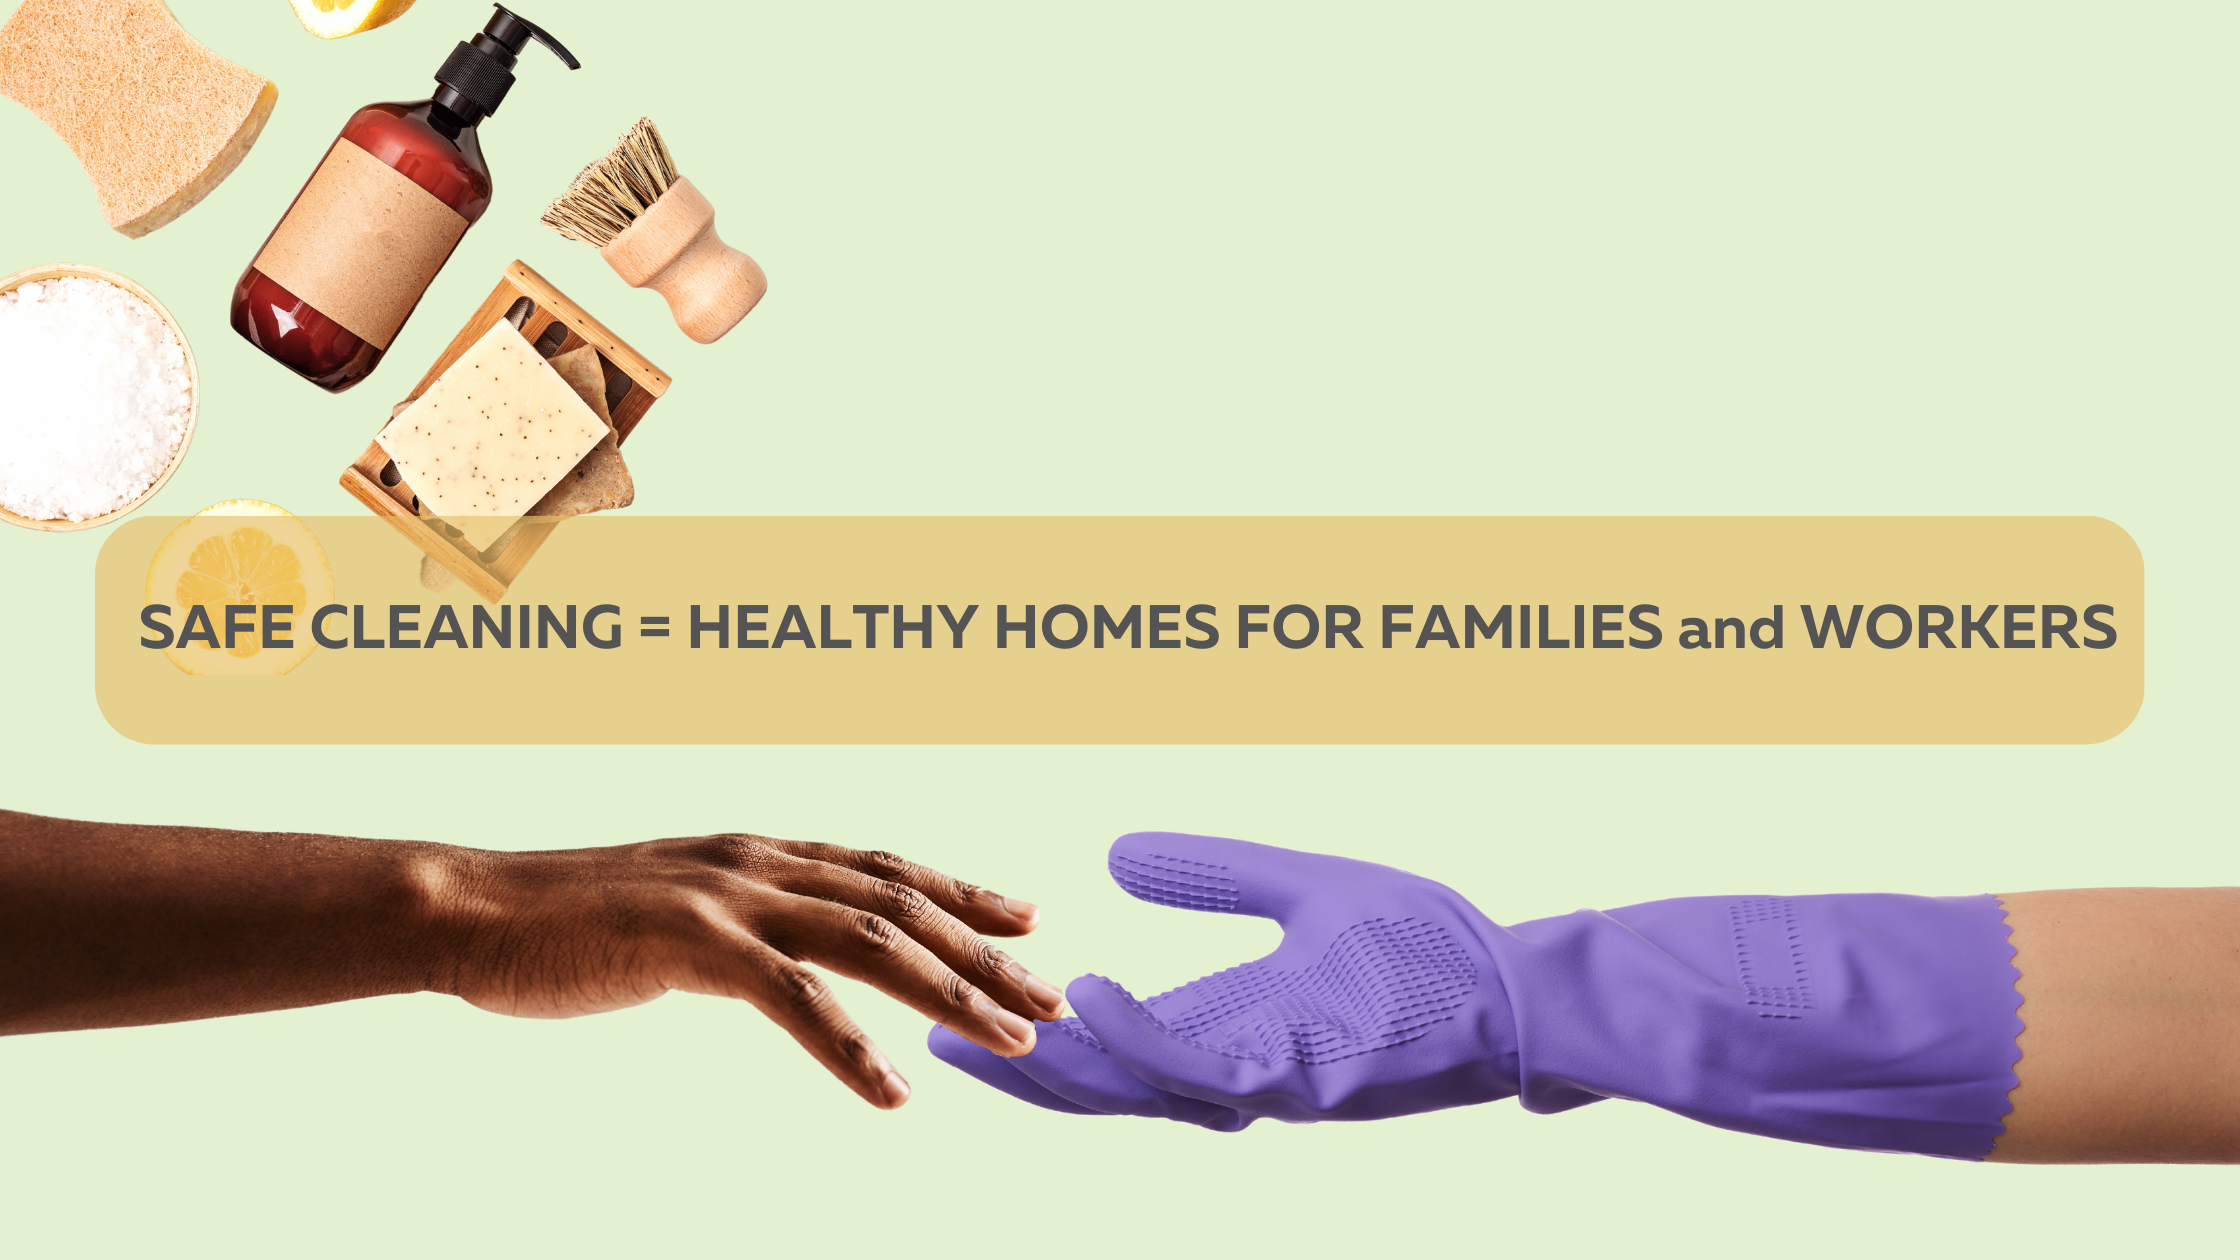 Safe Cleaning = Healthy Homes for Families and Workers